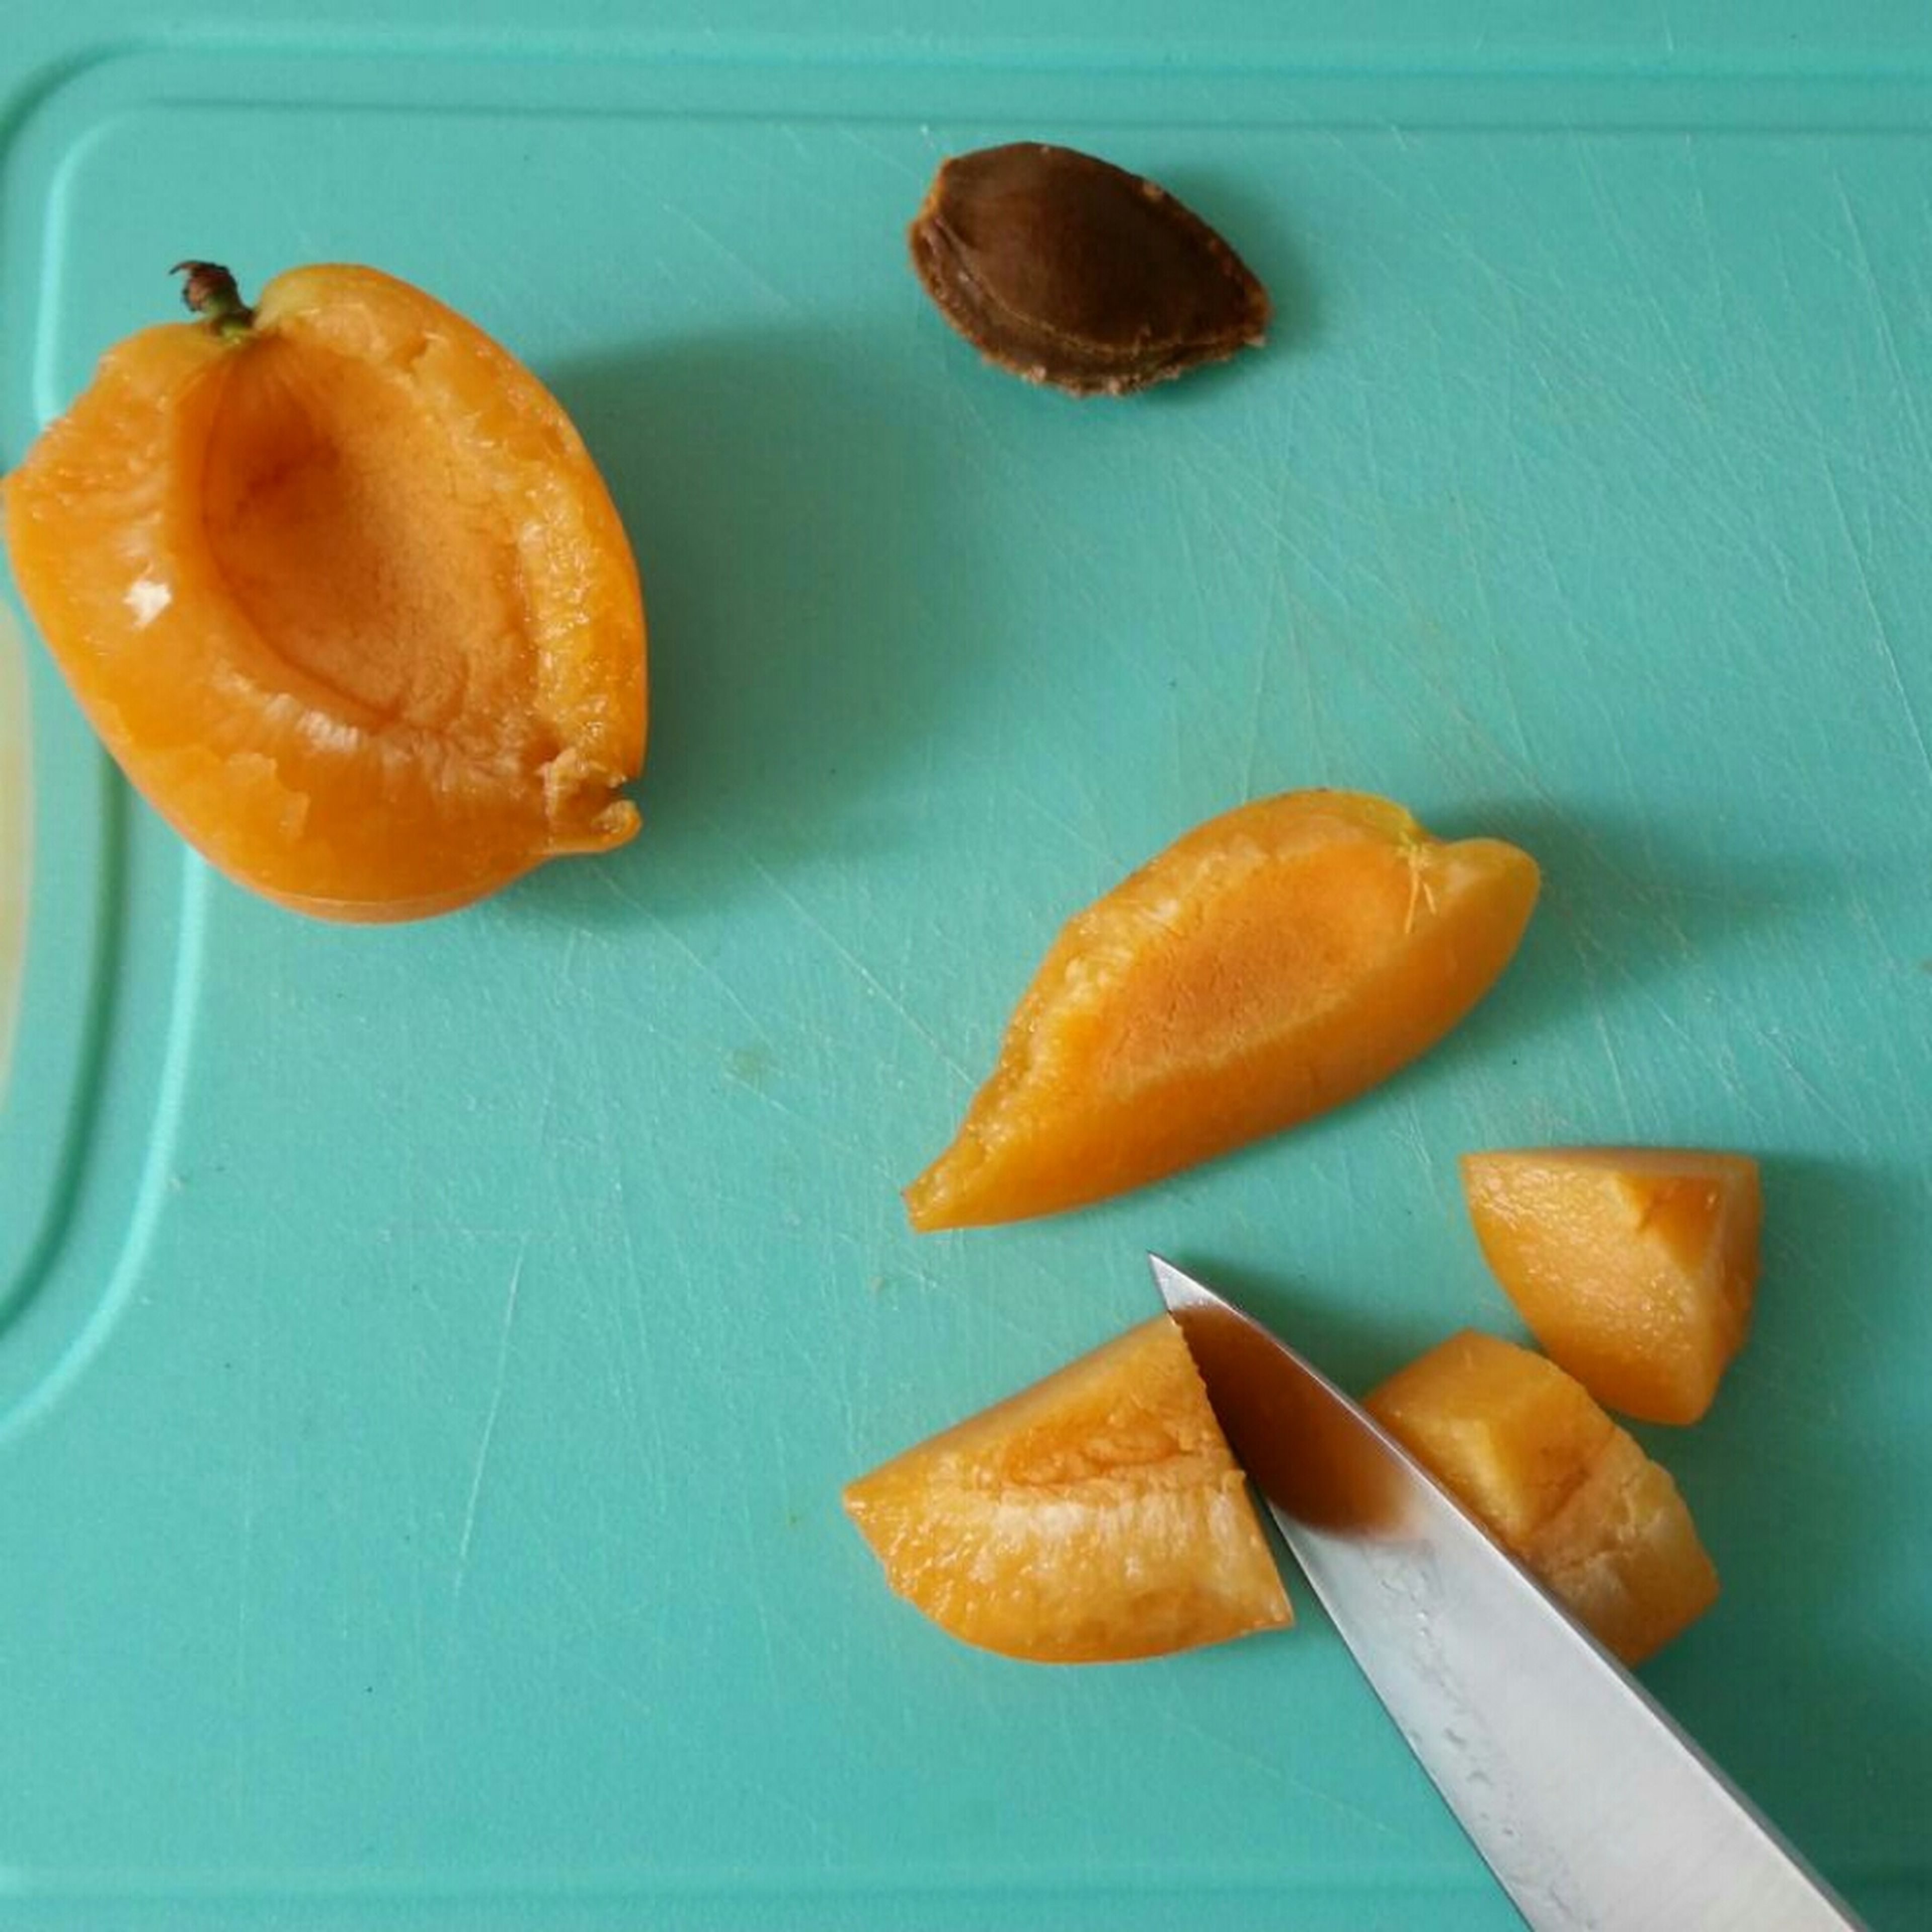 Rinse the apricots, remove the stones and cut them into small pieces